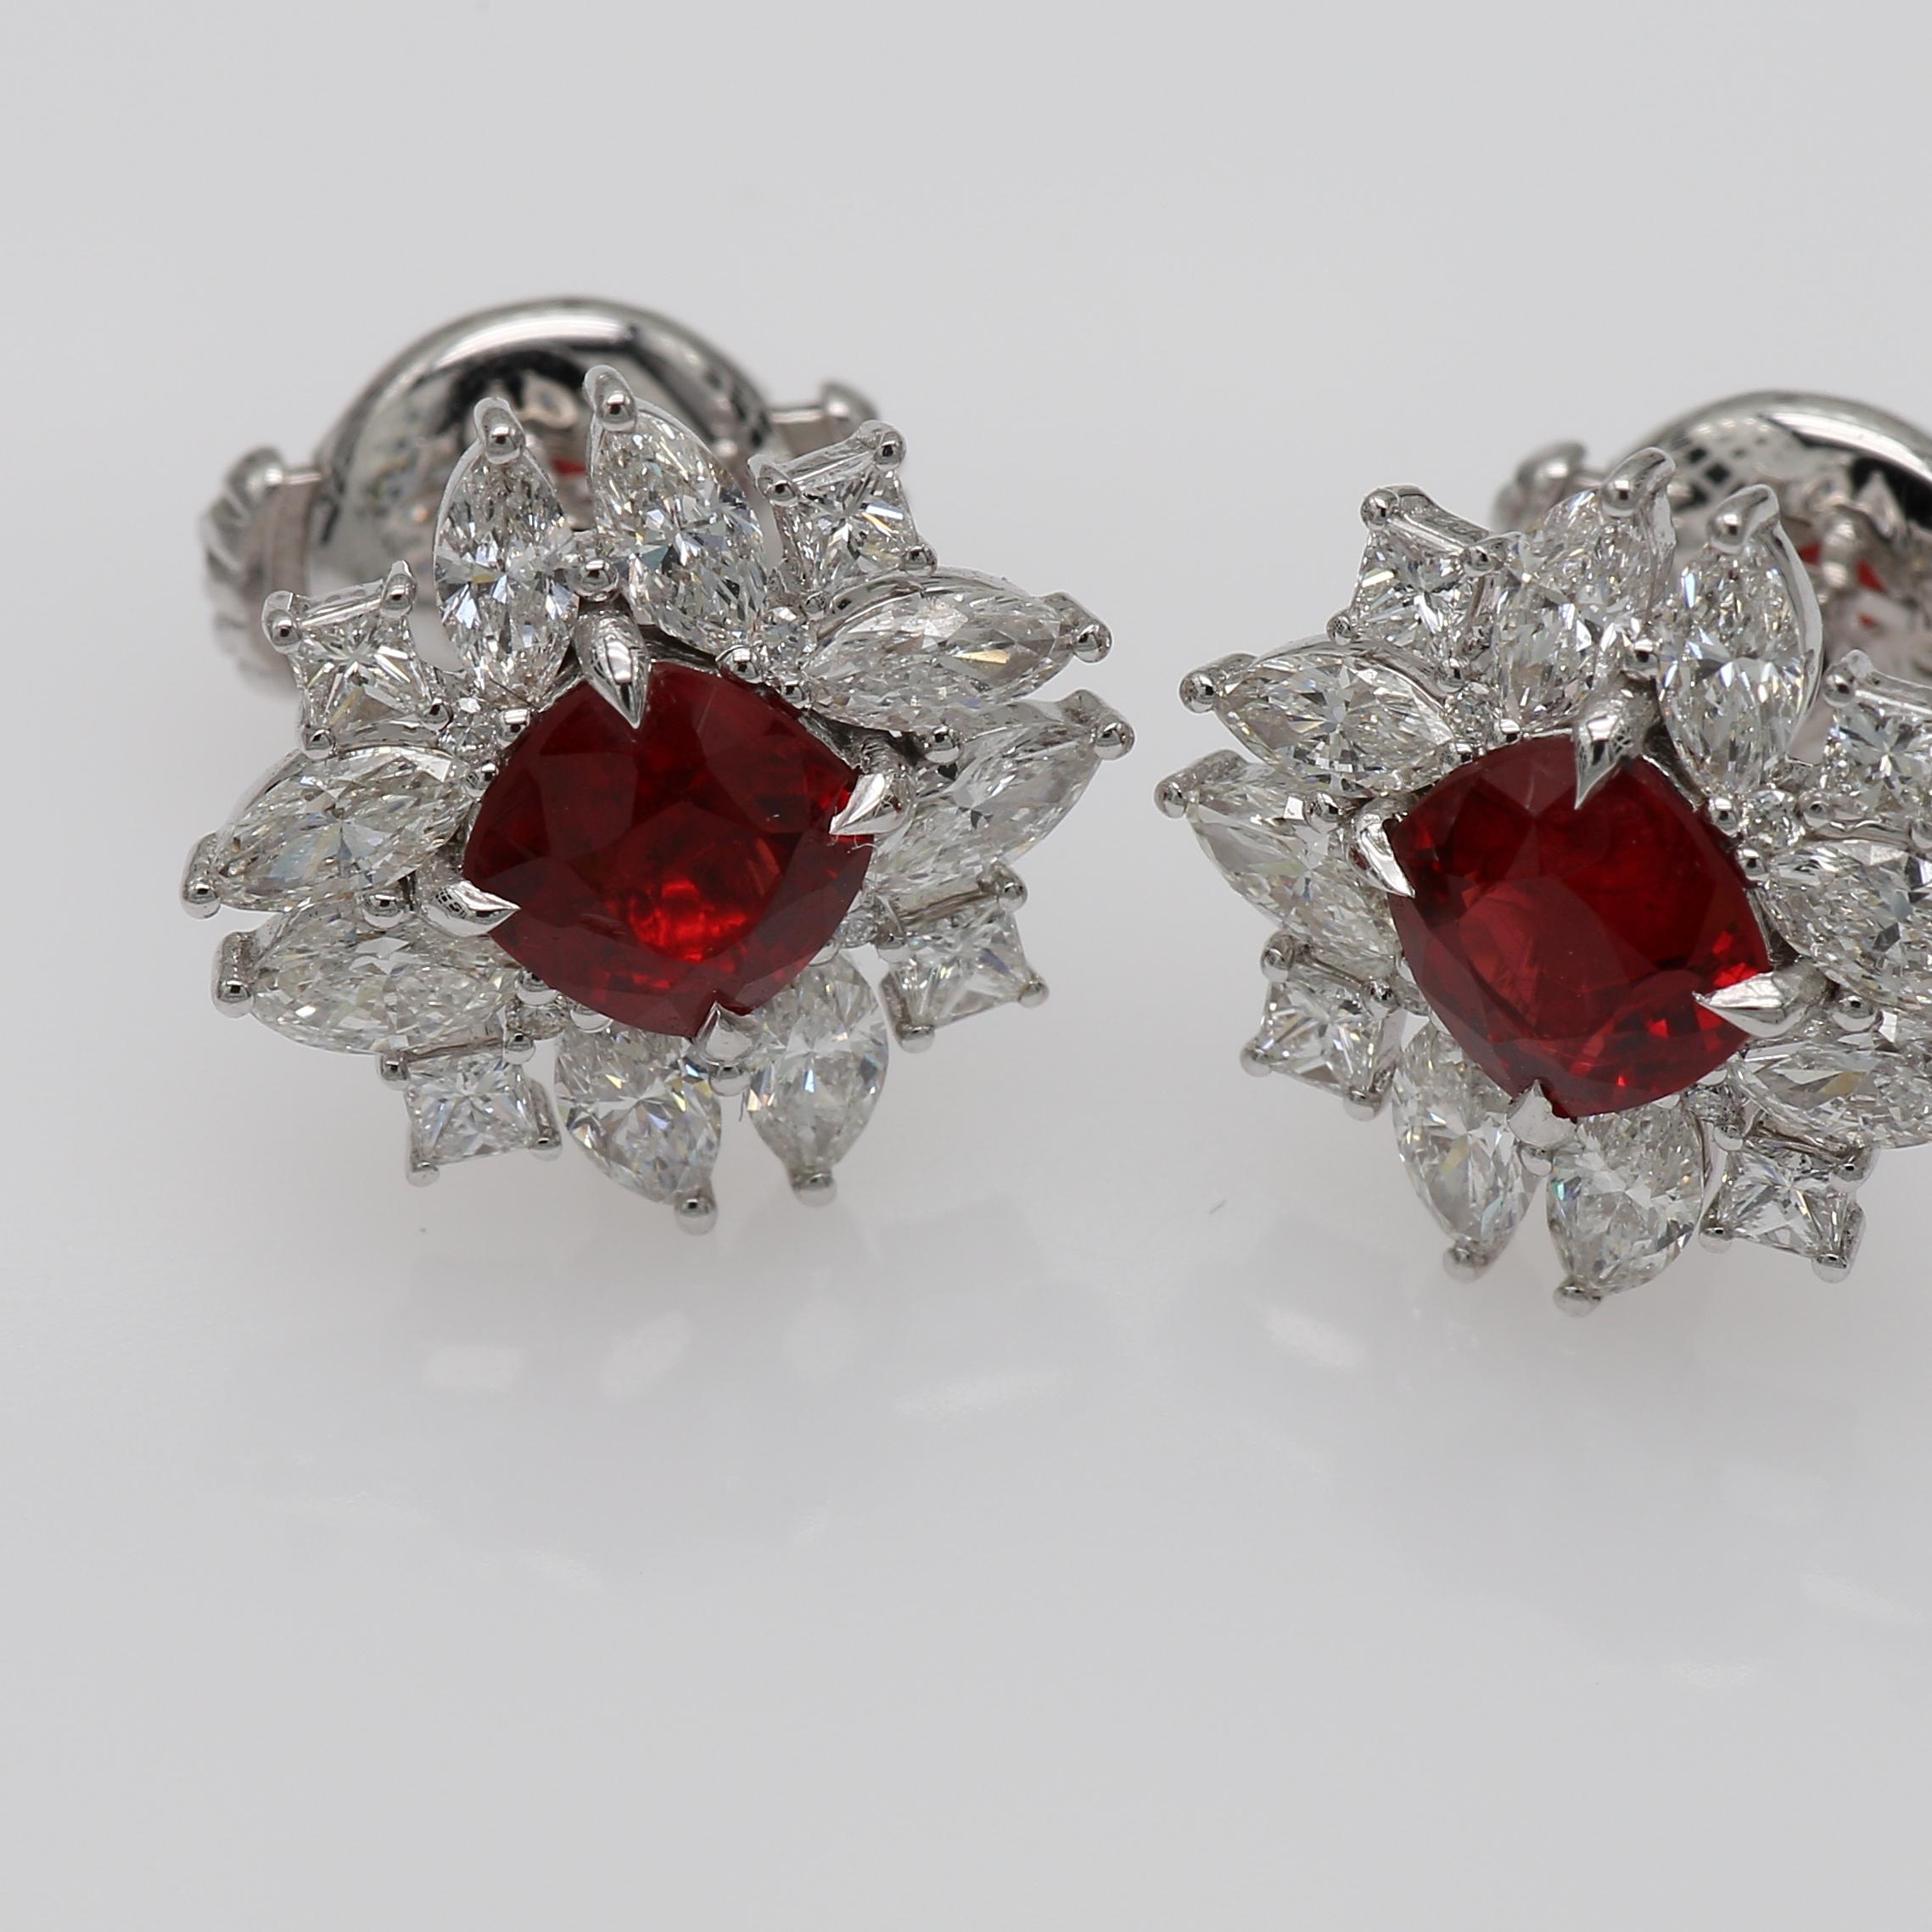 Enchanting natural Red Spinel Diamond centerstones in Cushion shape surrounded with fine Marquise and Princess shape natural Diamonds. Together they create two beautiful flower shaped Studs. The Studs are light weight and securely fastened with an